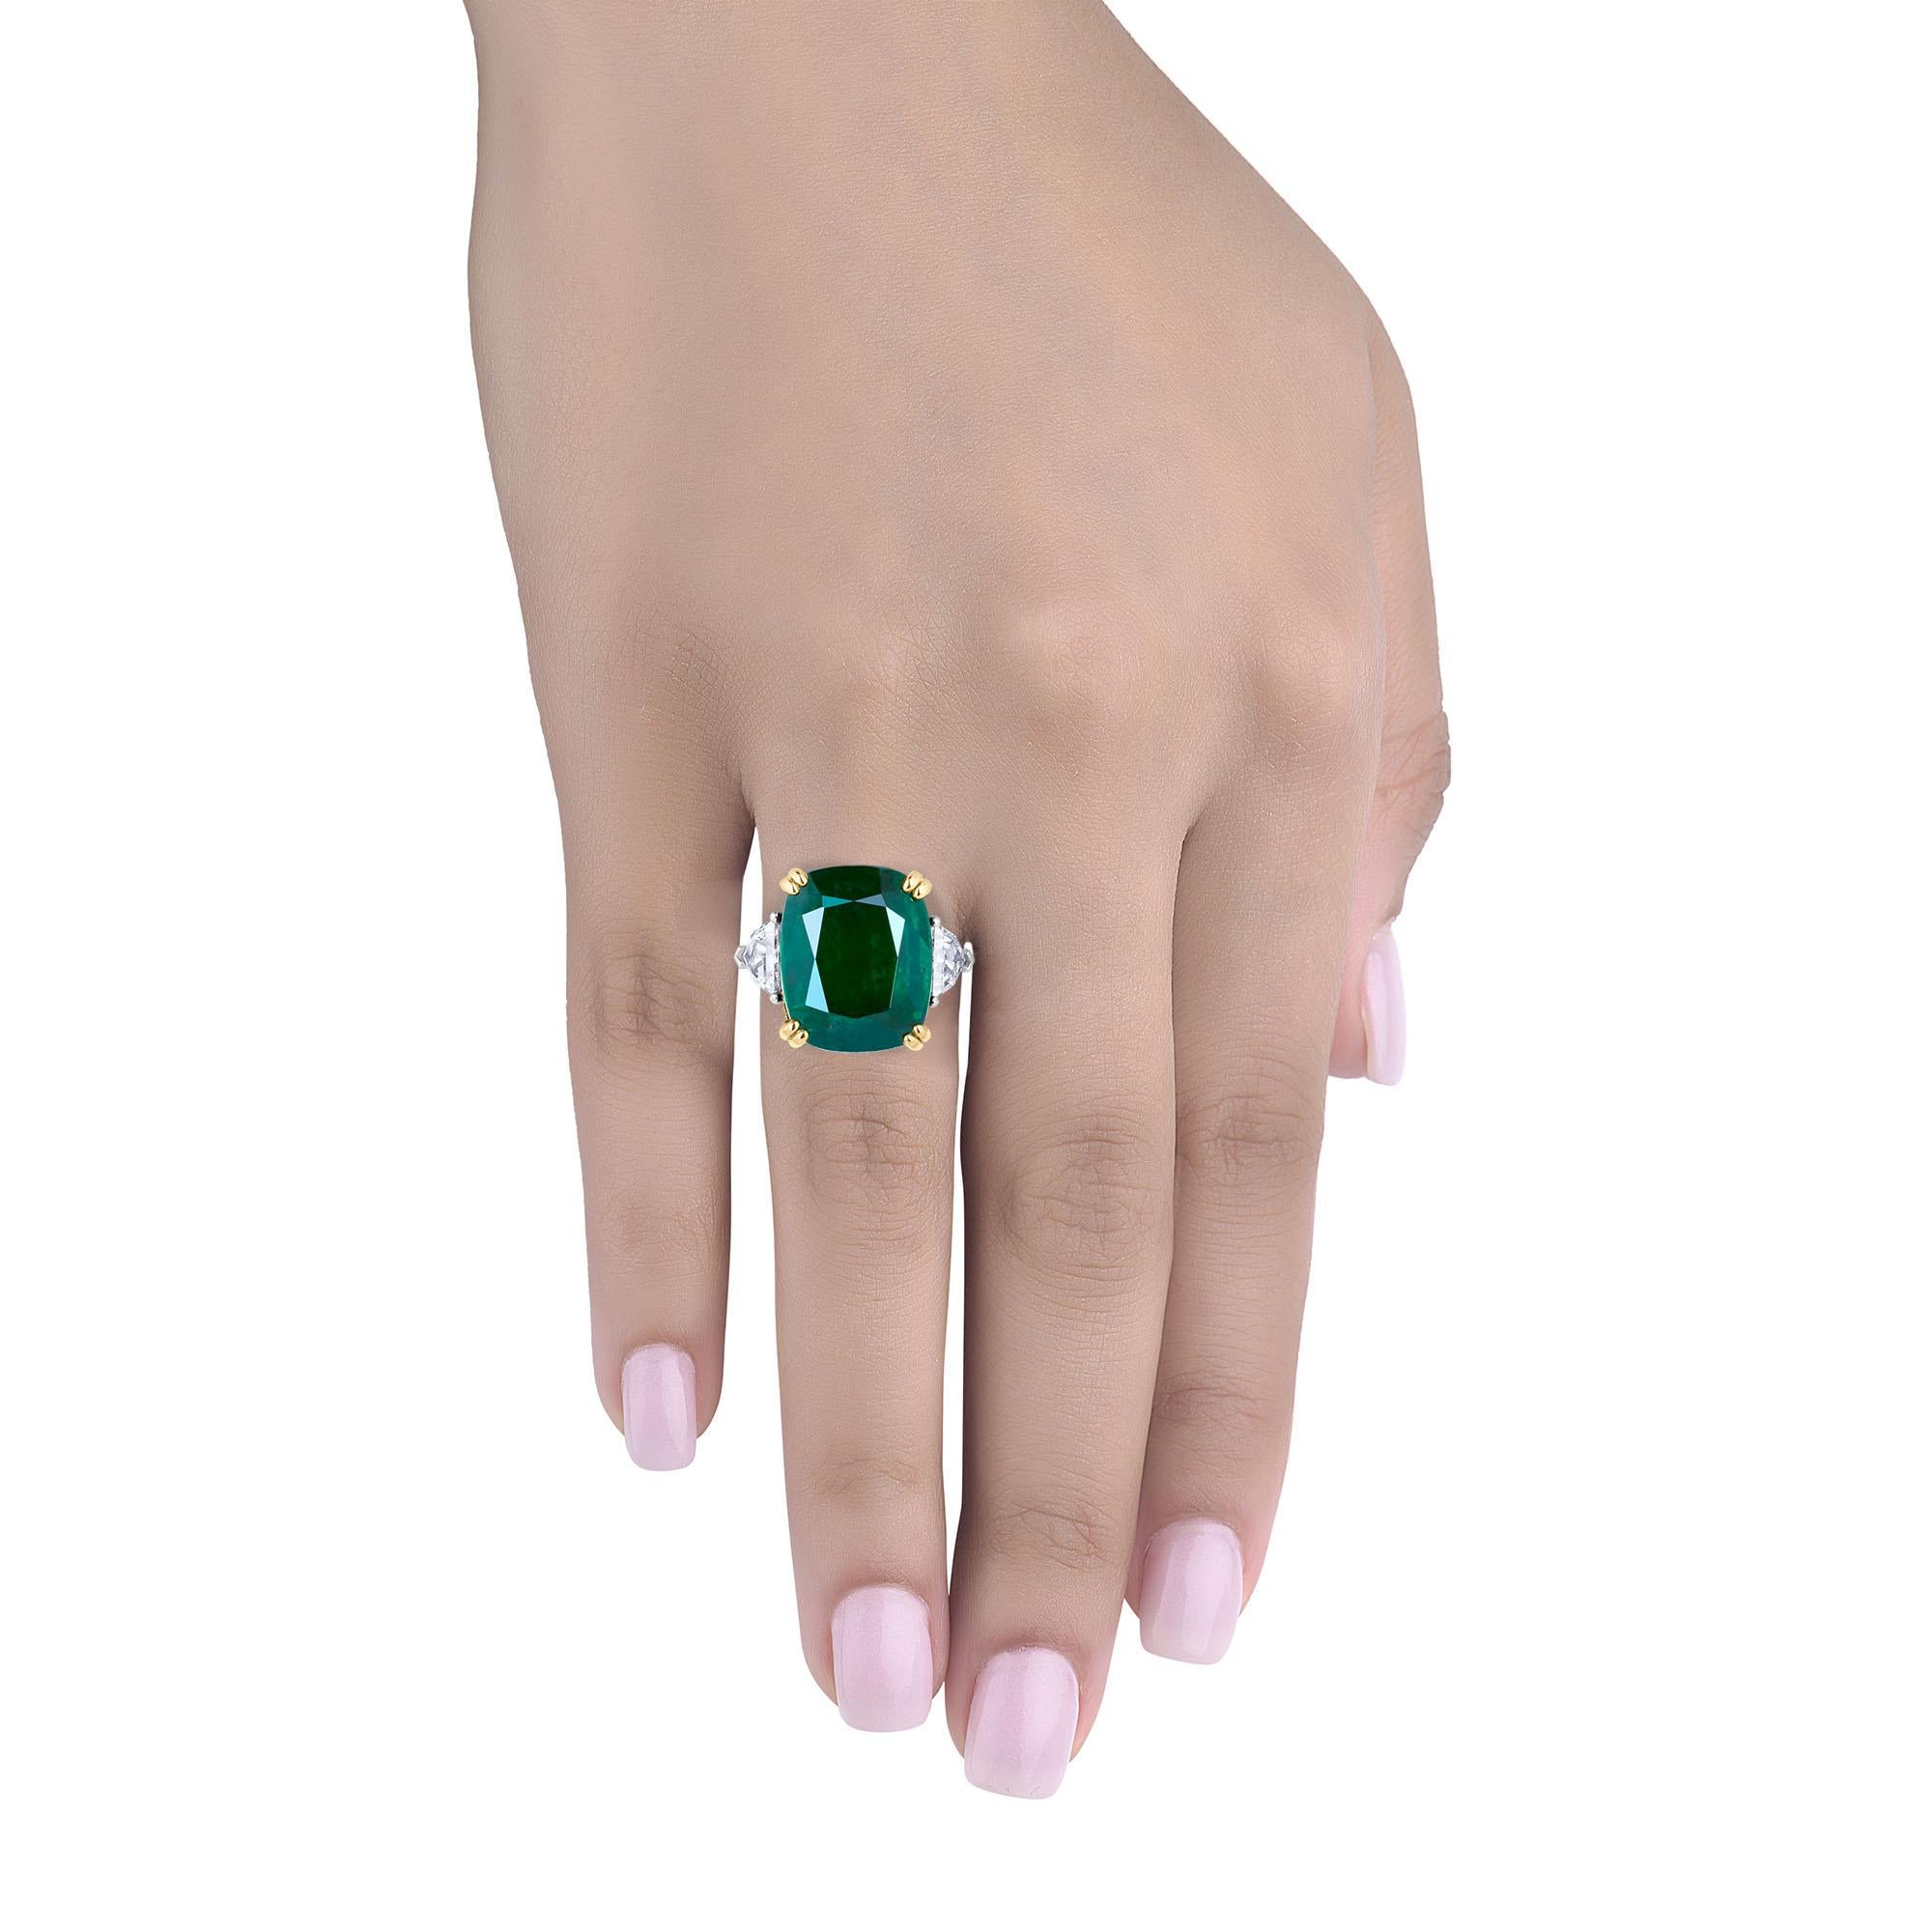 Video available upon request! Hand made in the Emilio Jewelry Factory, A gorgeous deep green very clean Cushion Zambian Emerald 11.22 Carats set in the center. The emerald is very clean and completely eye clean. This emerald is very rich in color